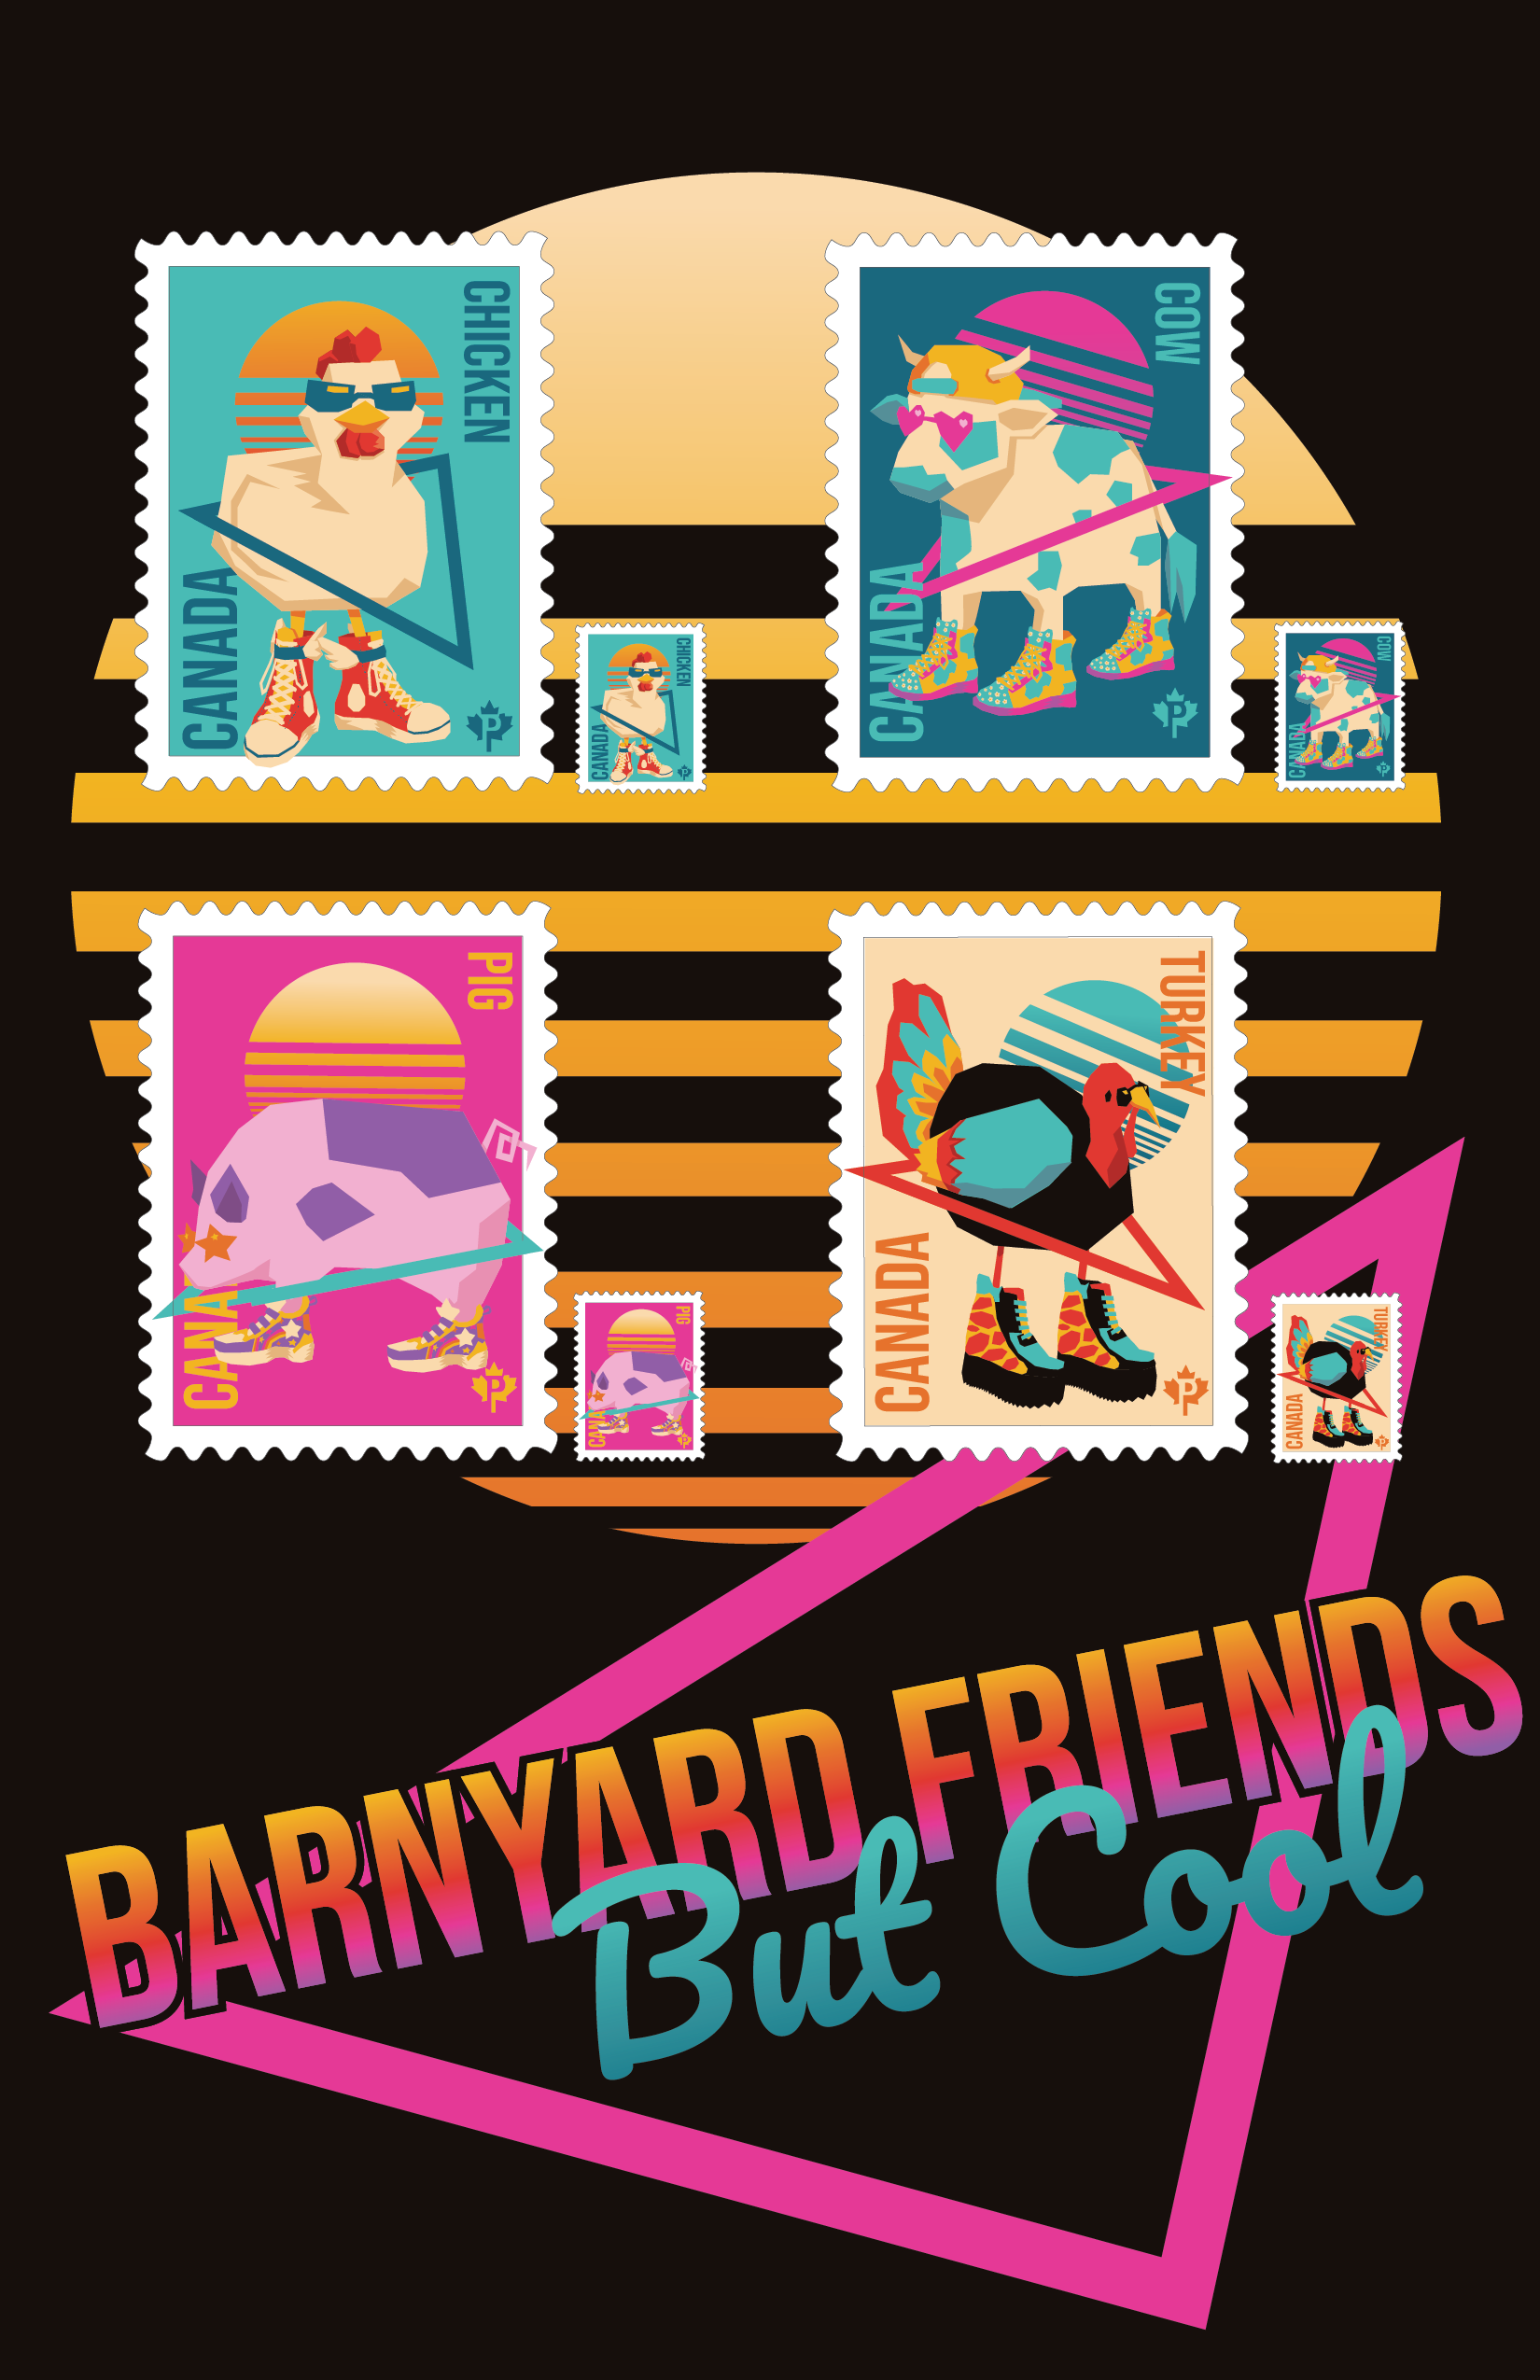 Stamps of barnyard animals wearing cool shoes